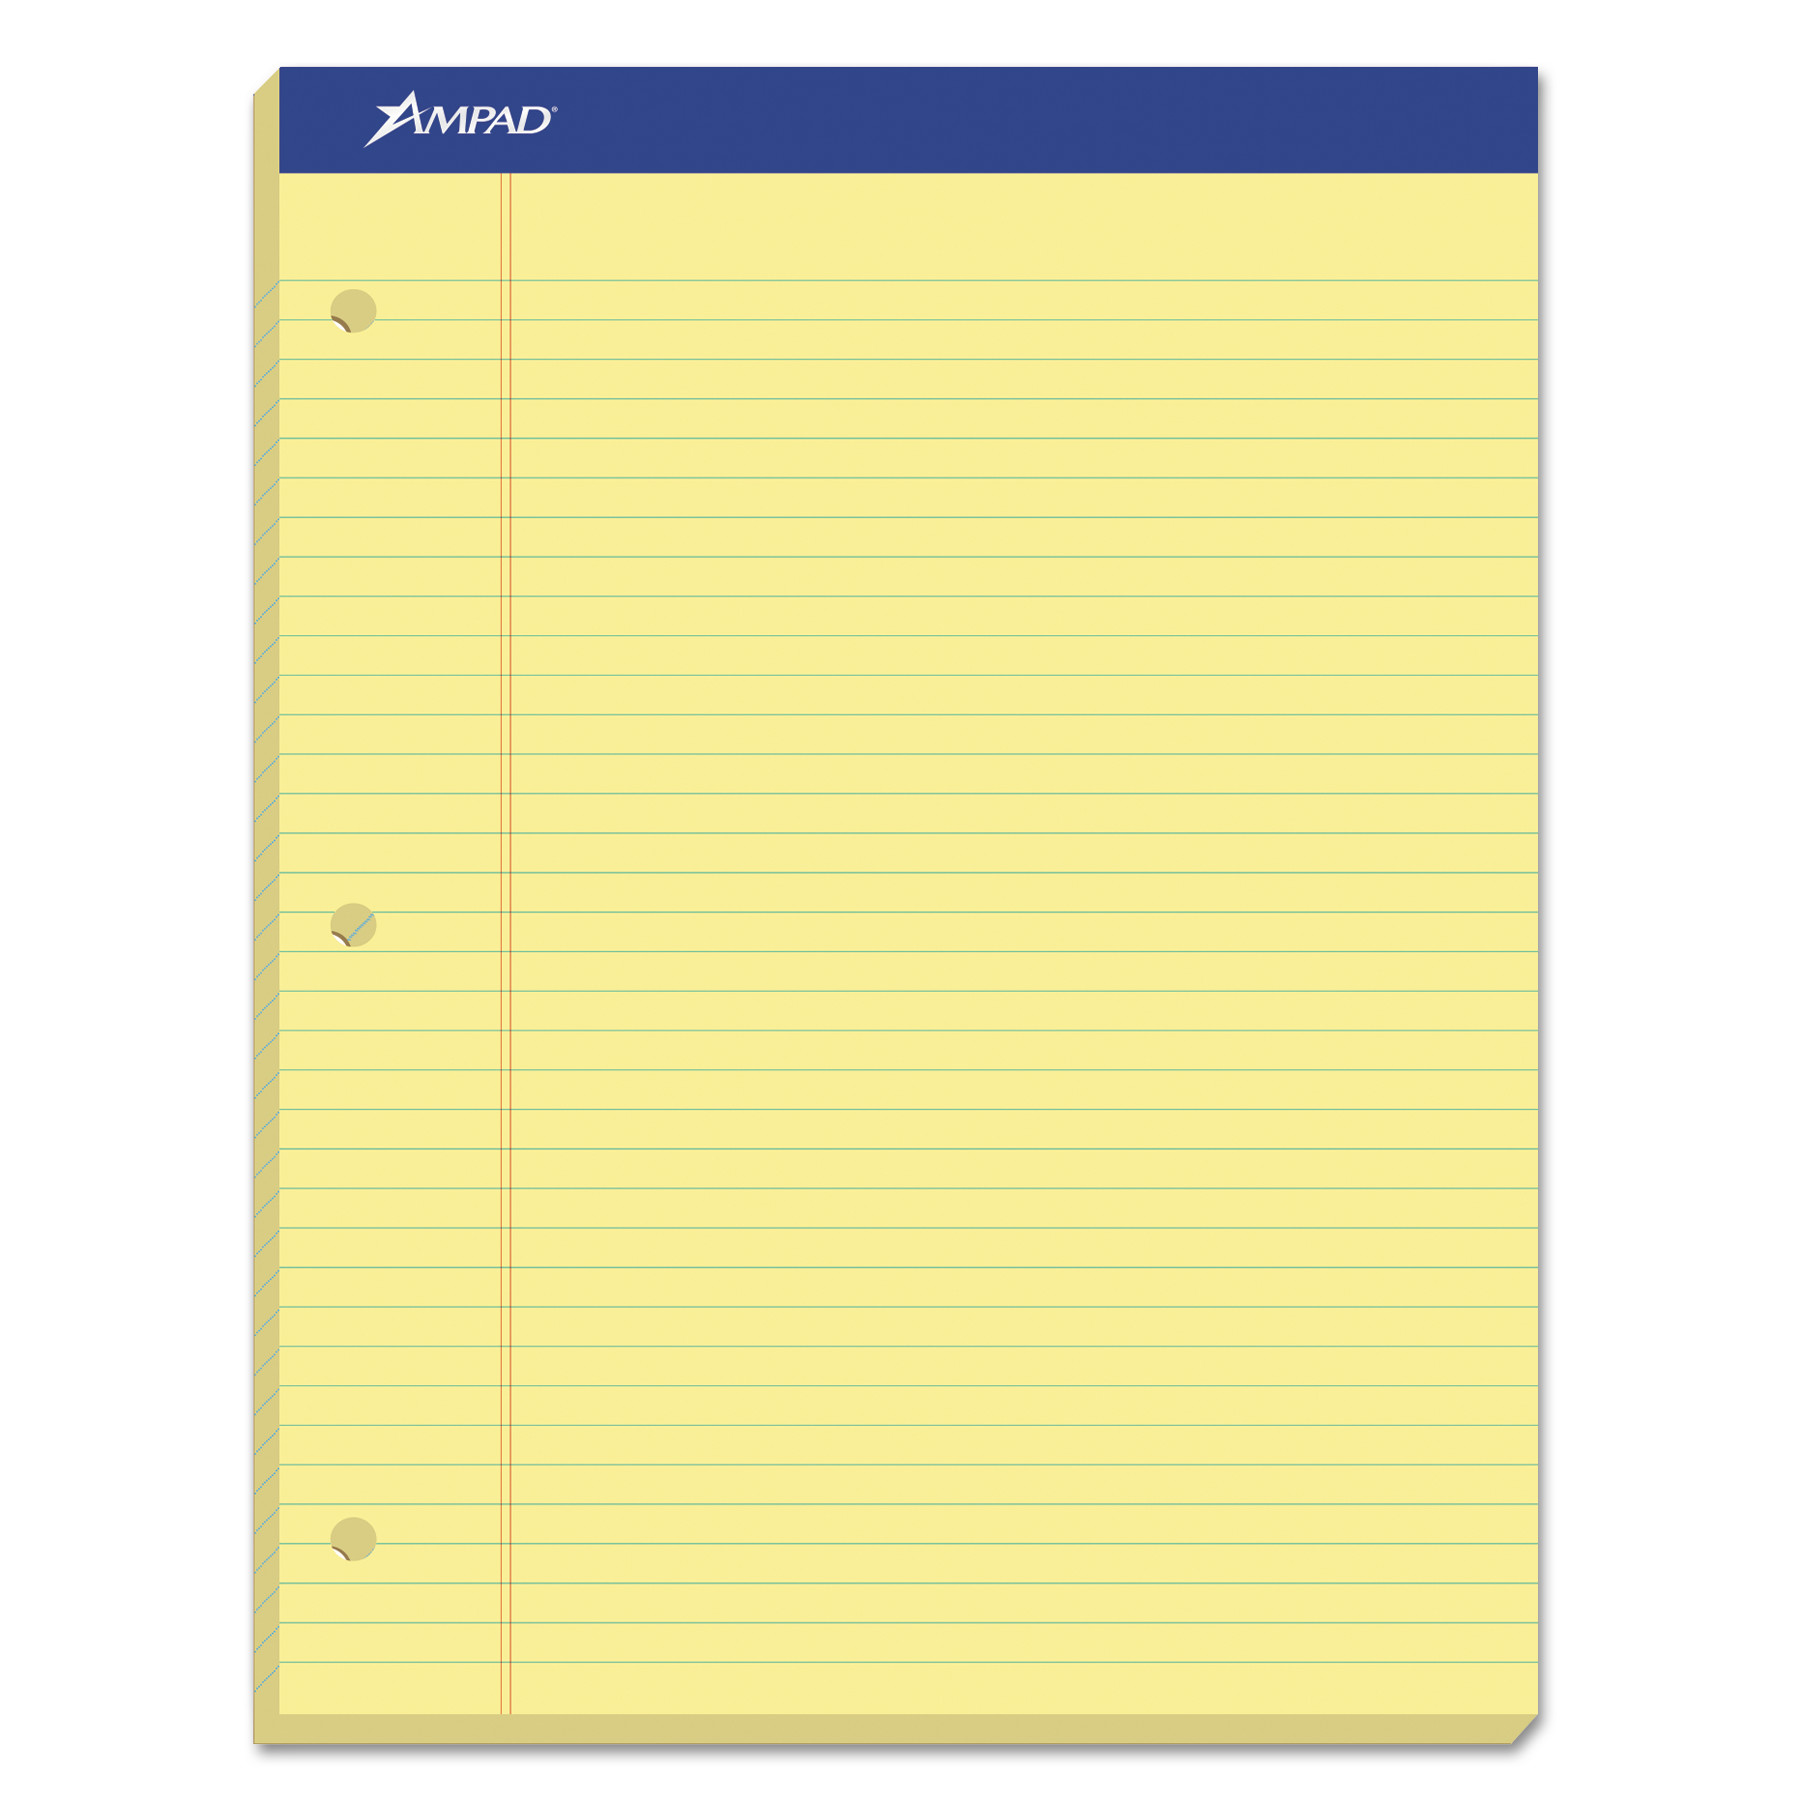  Ampad 20-246 Double Sheet Pads, Narrow Rule, 8.5 x 11.75, Canary, 100 Sheets (TOP20246) 